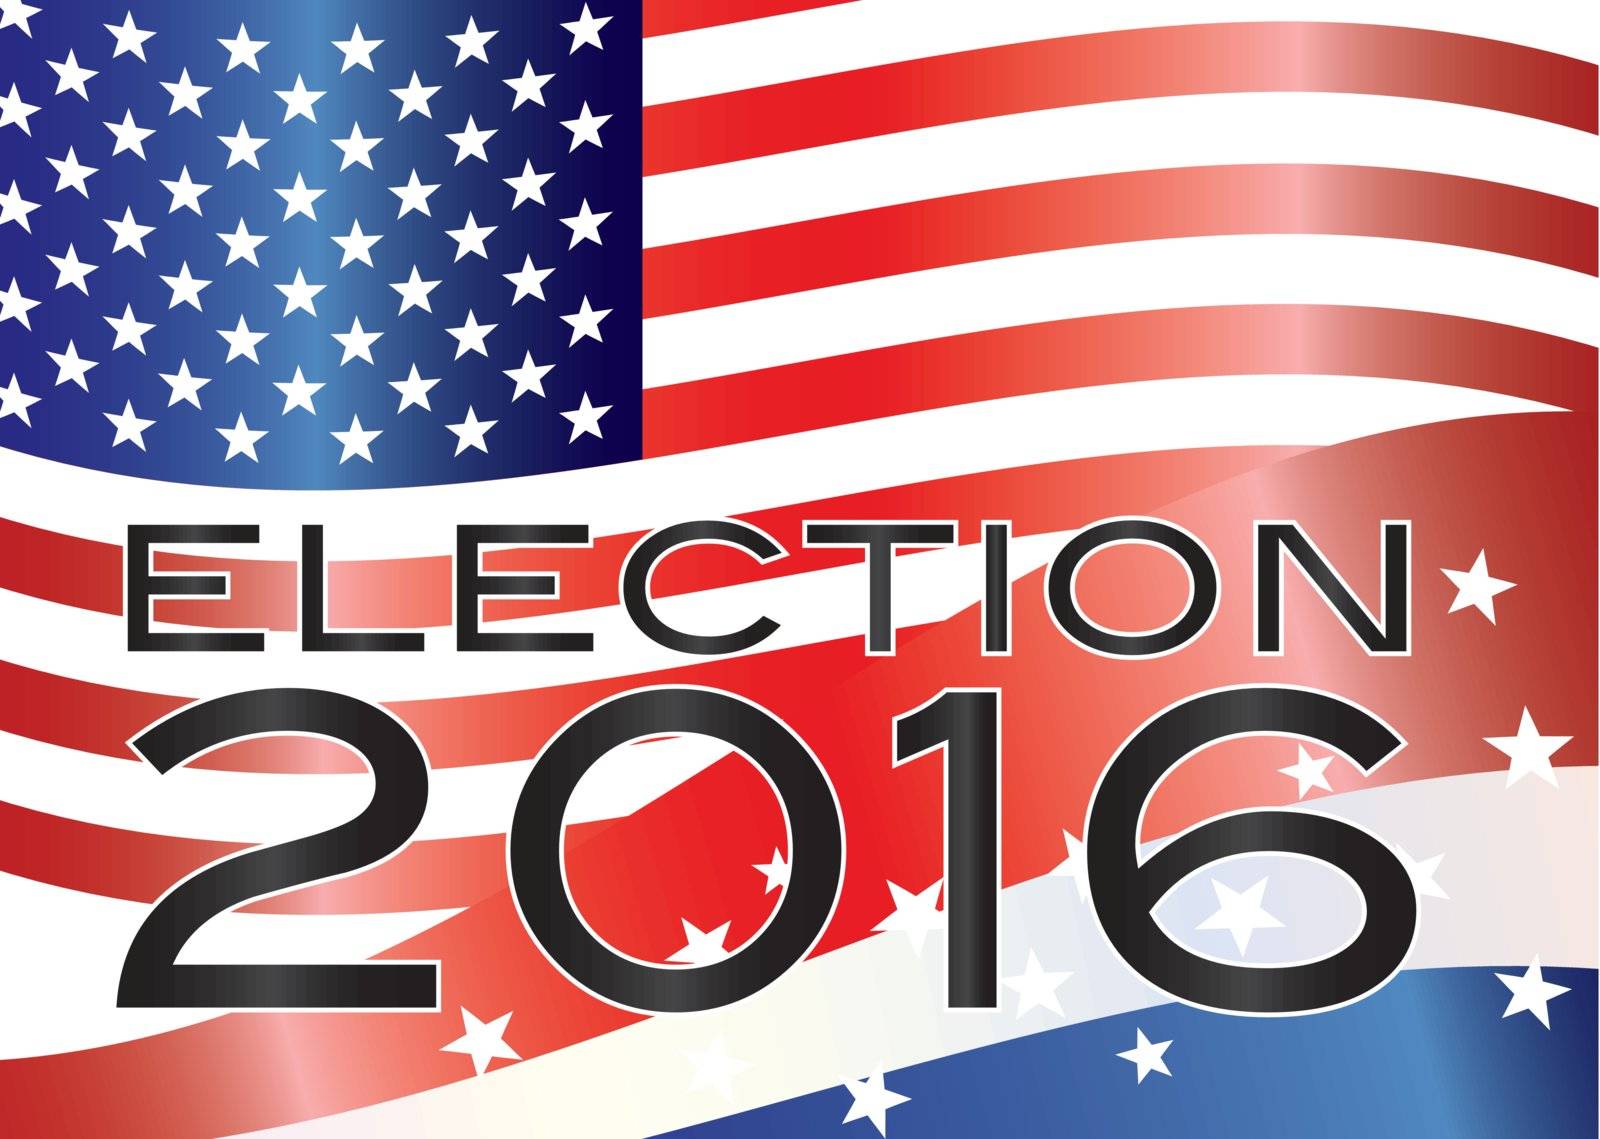 Election 2016 with Stars and Stripes and US Flag Background Illustration